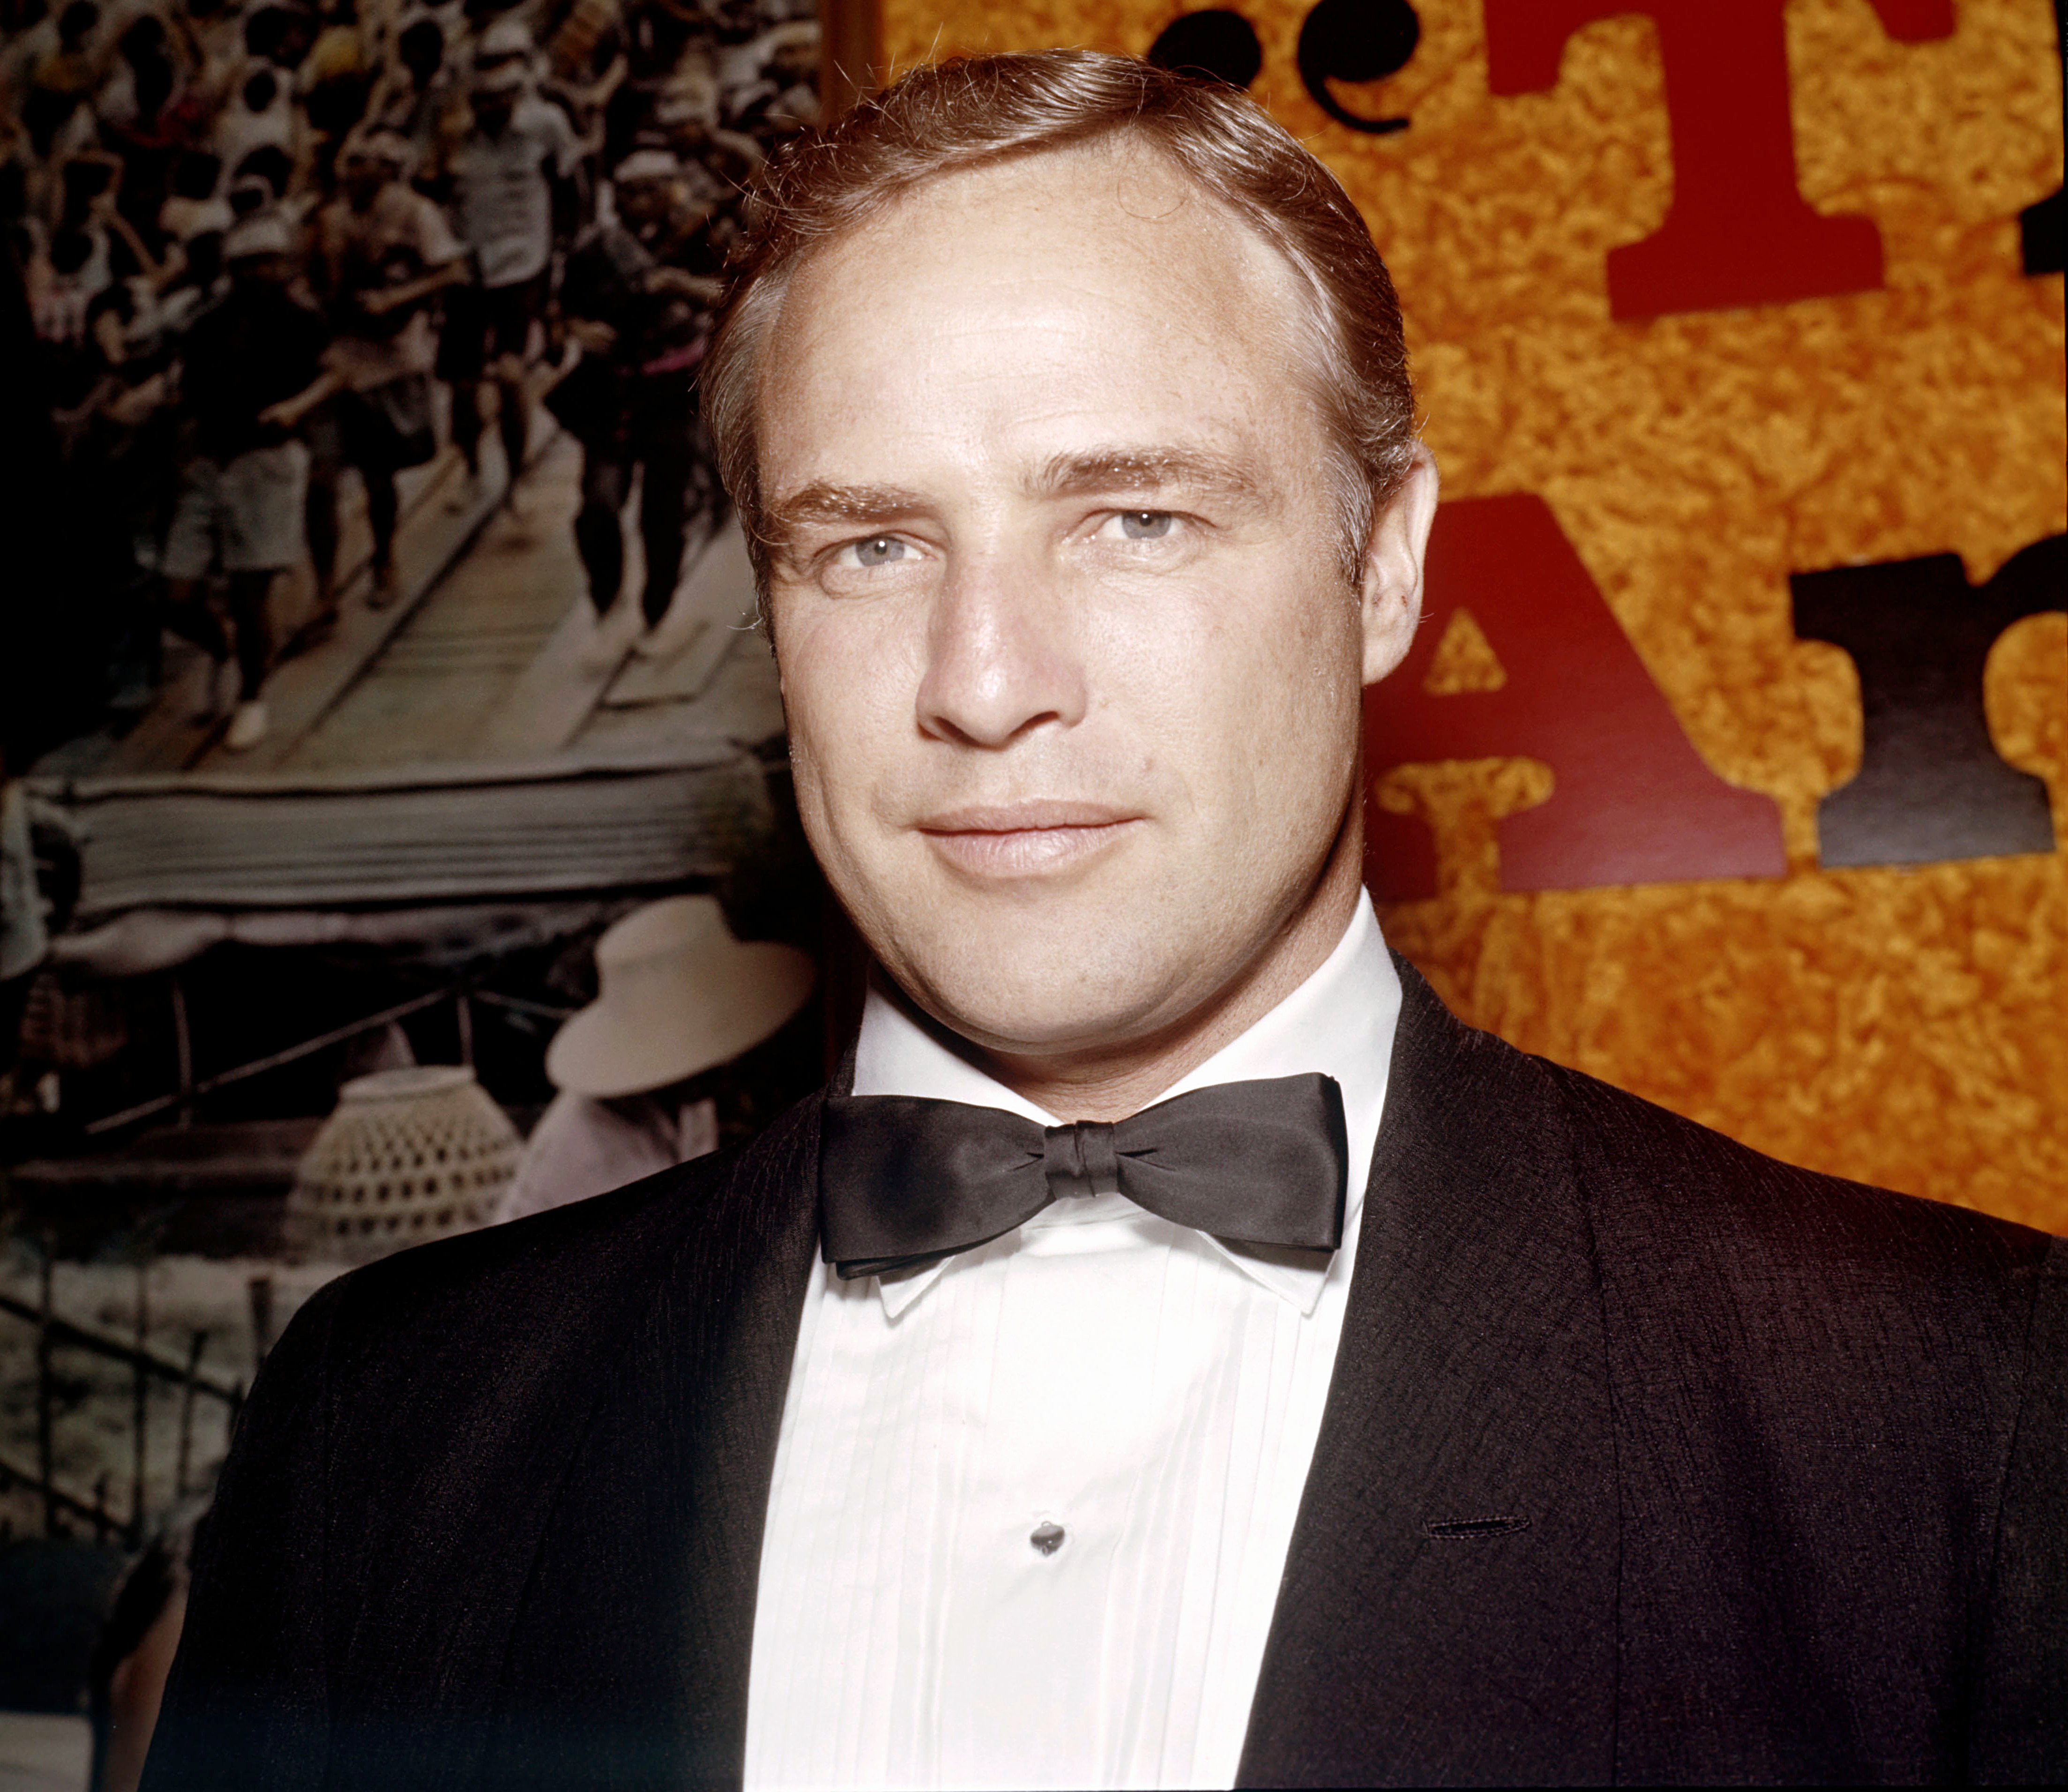 Marlon Brando S Death Examined In Autopsy The Last Hours Of